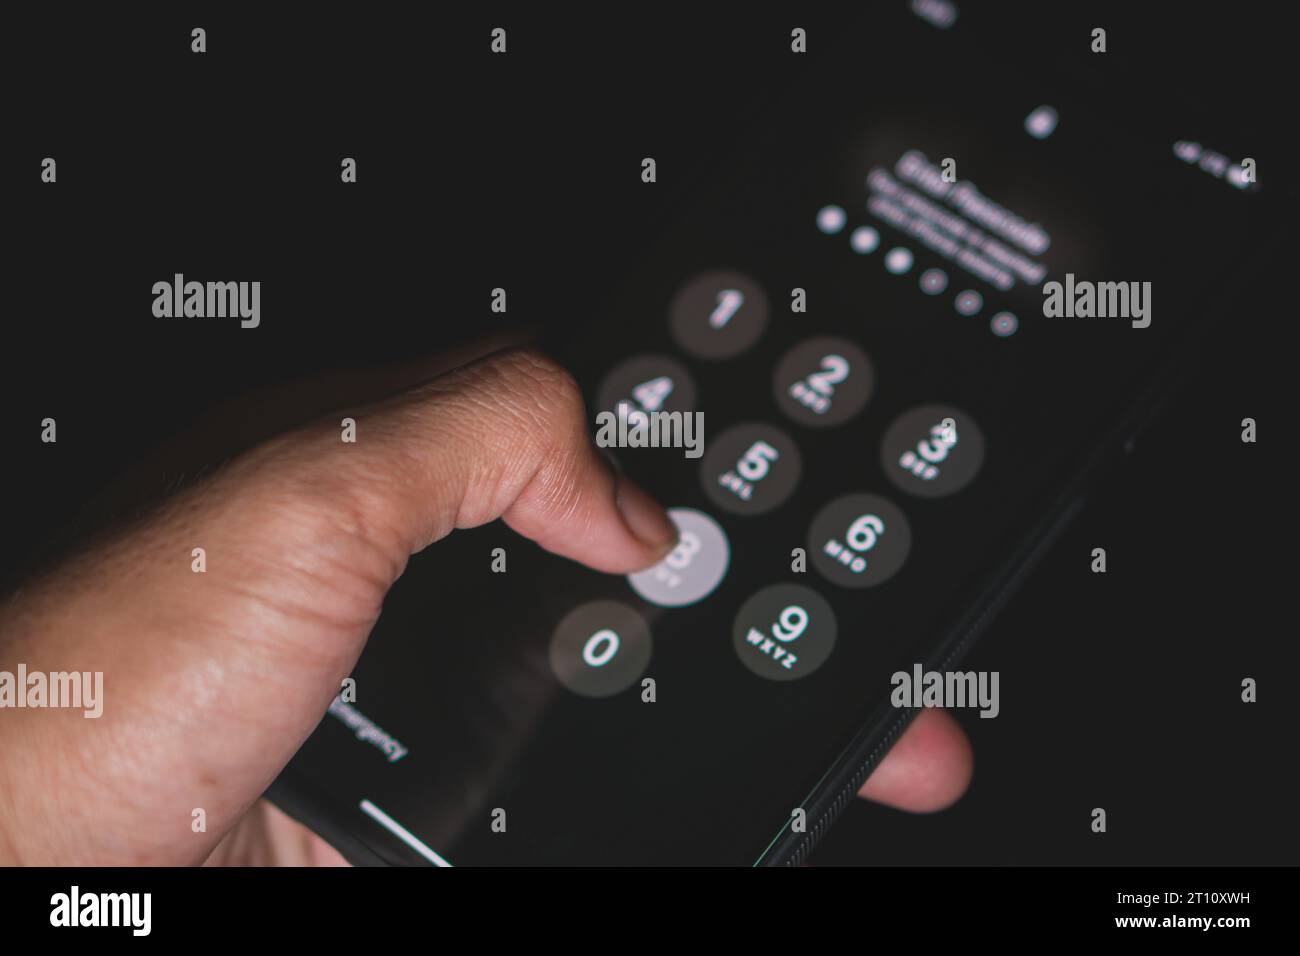 password for log-in on the screen of a cell phone - cyber security concept Stock Photo